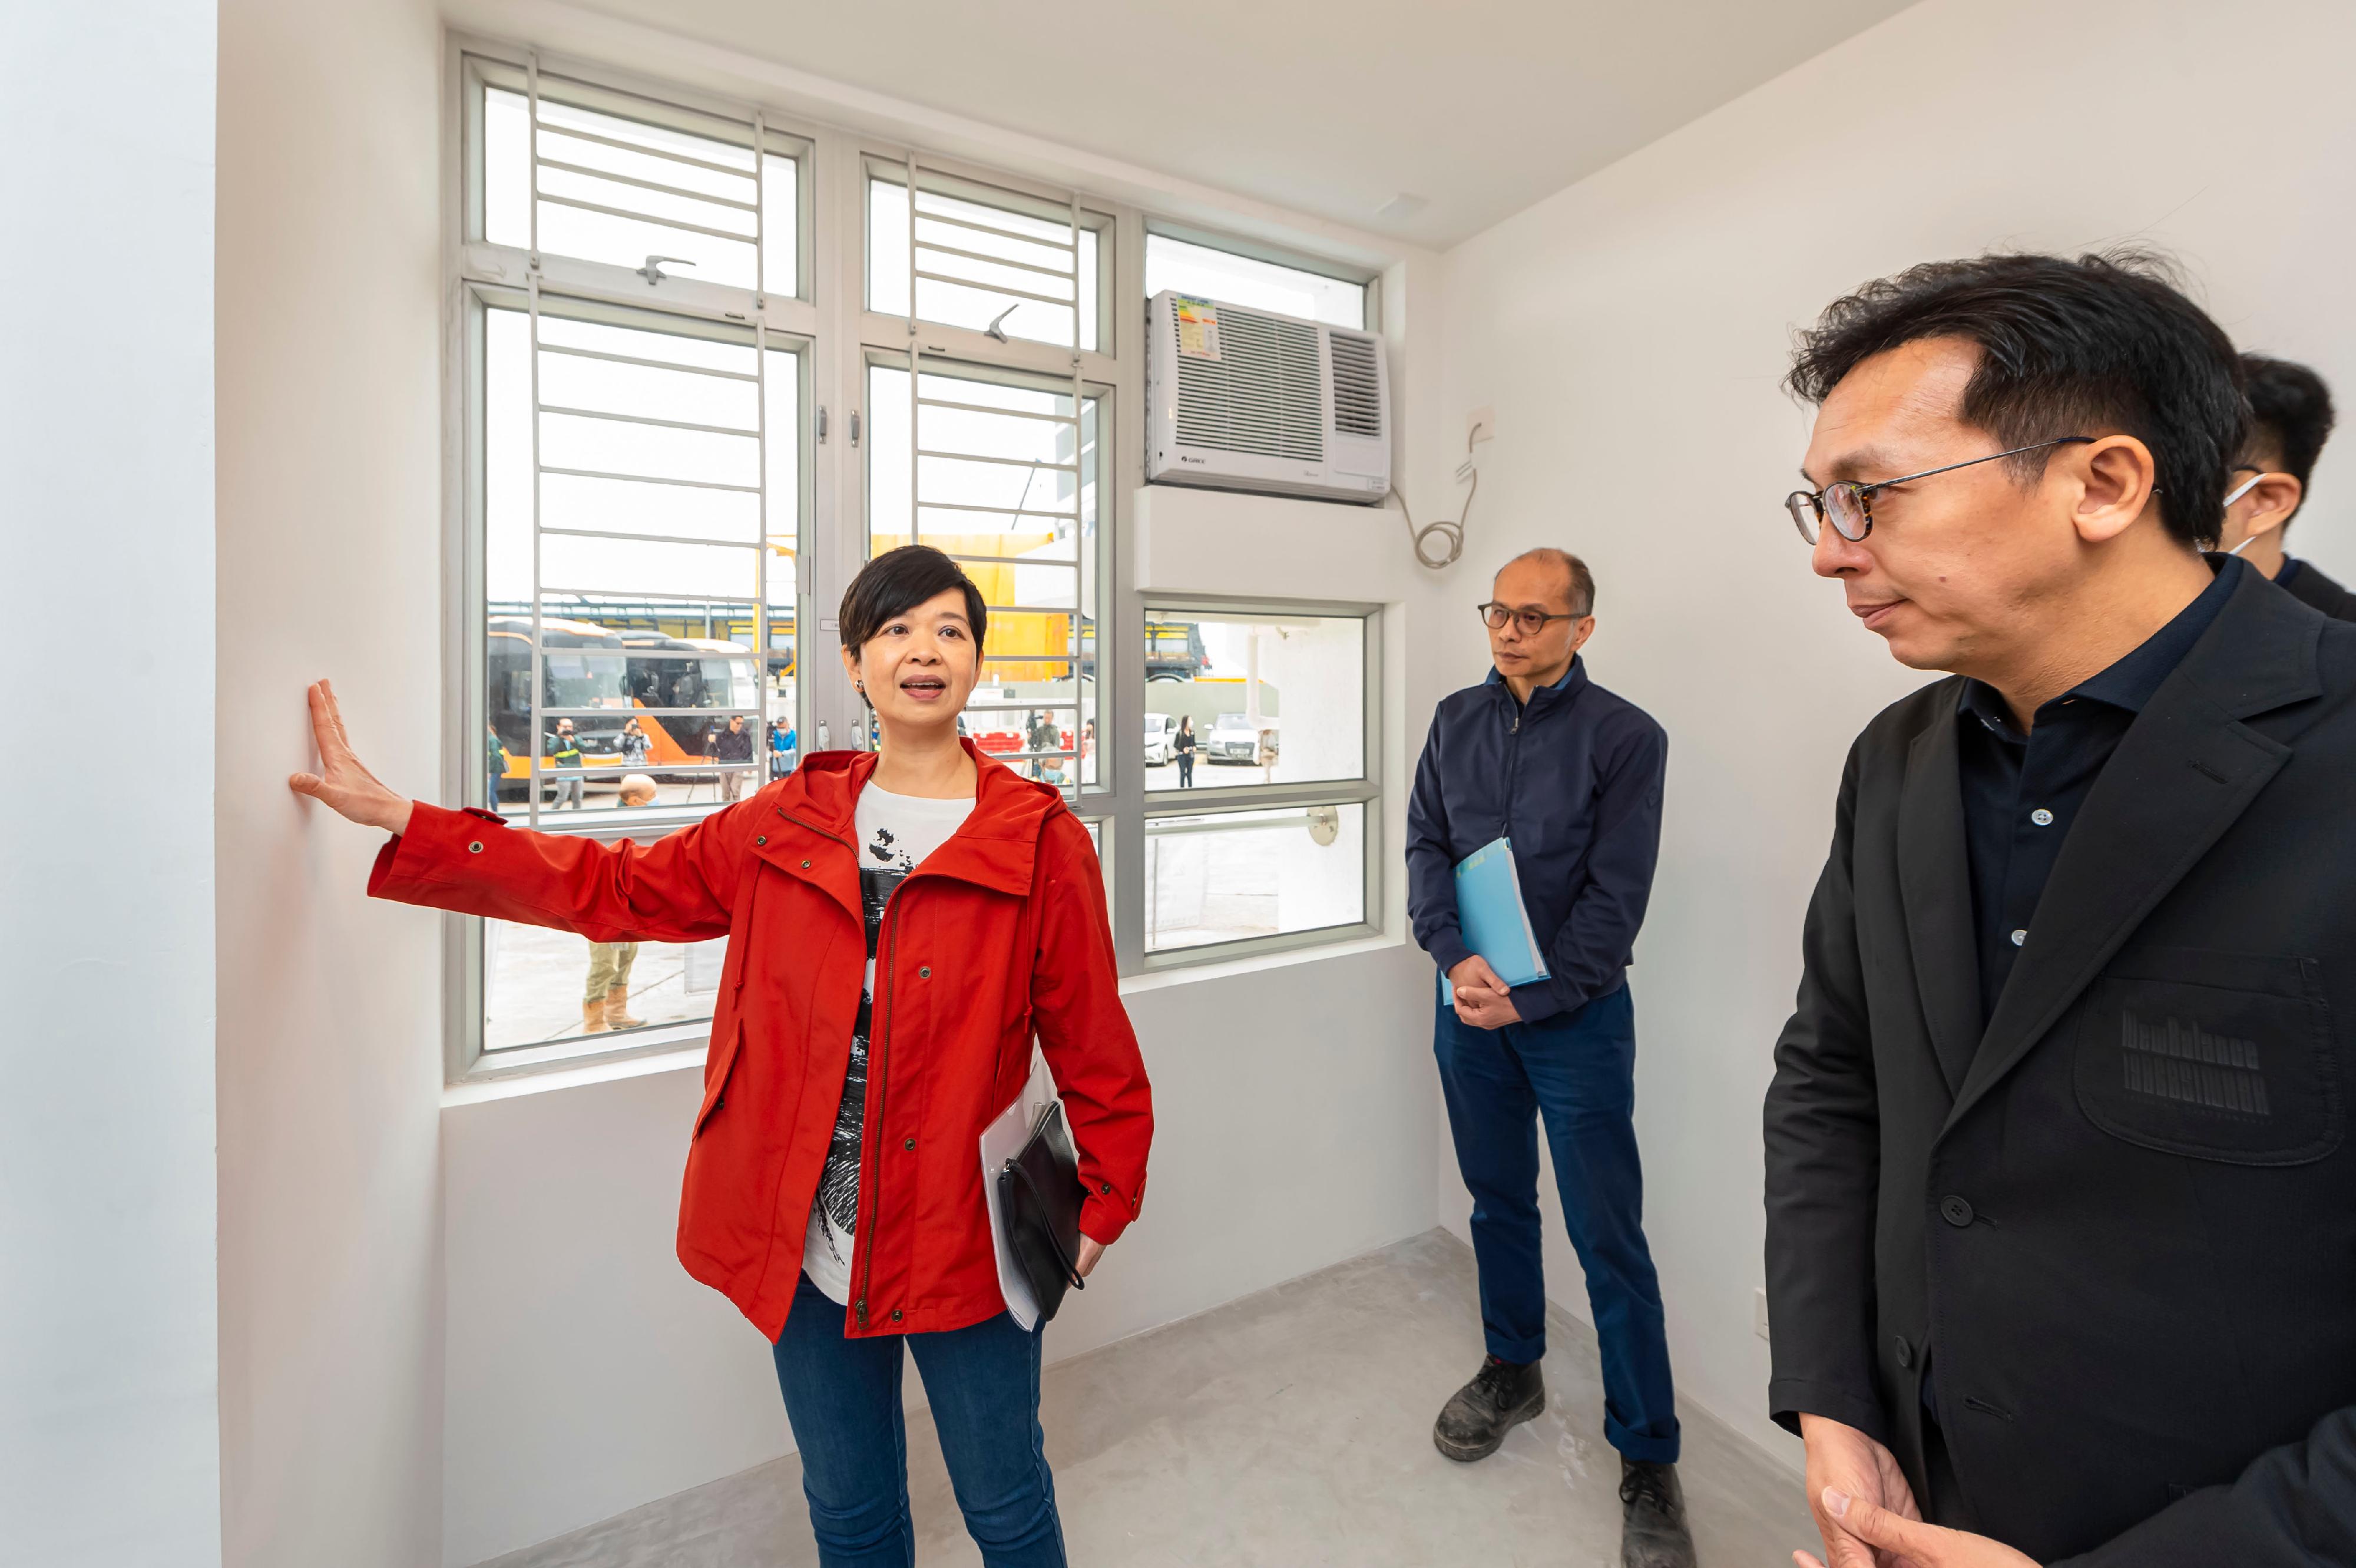 The Hong Kong Housing Authority (HA) arranged a media visit to the Modular Integrated Construction (MiC) mock-up for the public housing development at Tung Chung Area 99 today (March 31). Photo shows the Secretary for Housing cum HA Chairman, Ms Winnie Ho (left), touring the MiC mock-up unit.


